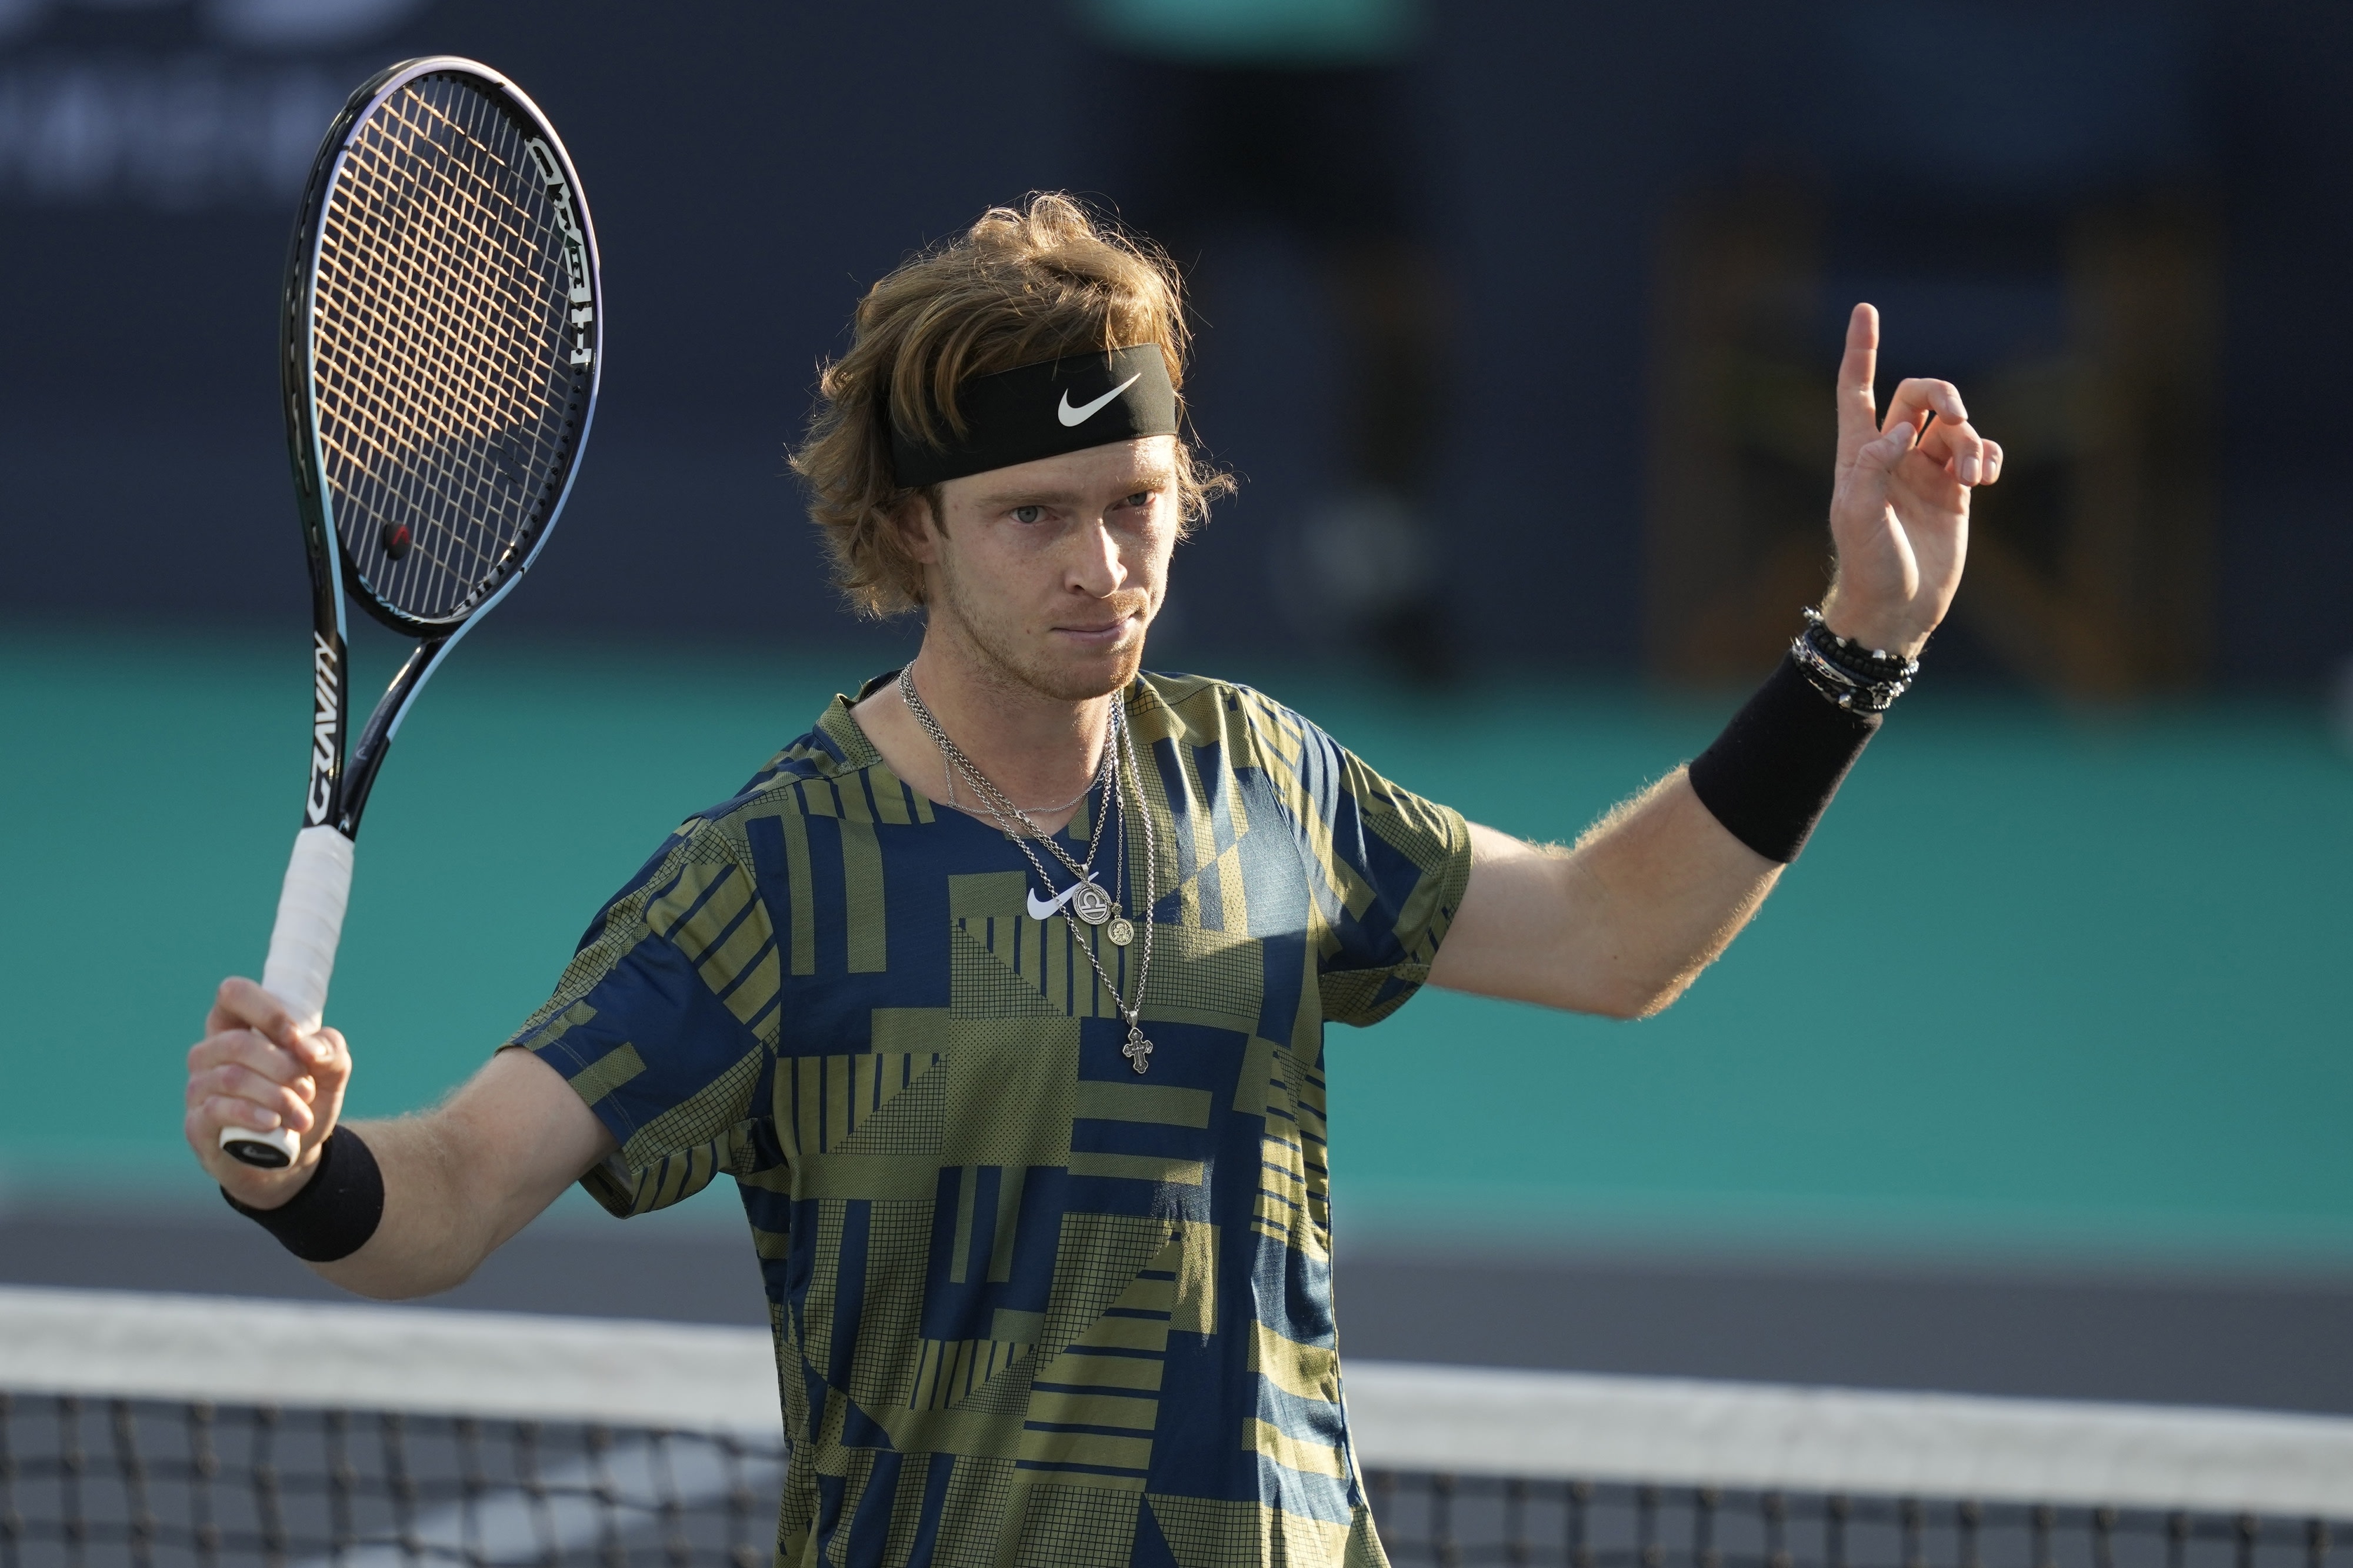 “Equality, kindness, hope” Andrey Rublev launches Rublo, a clothing